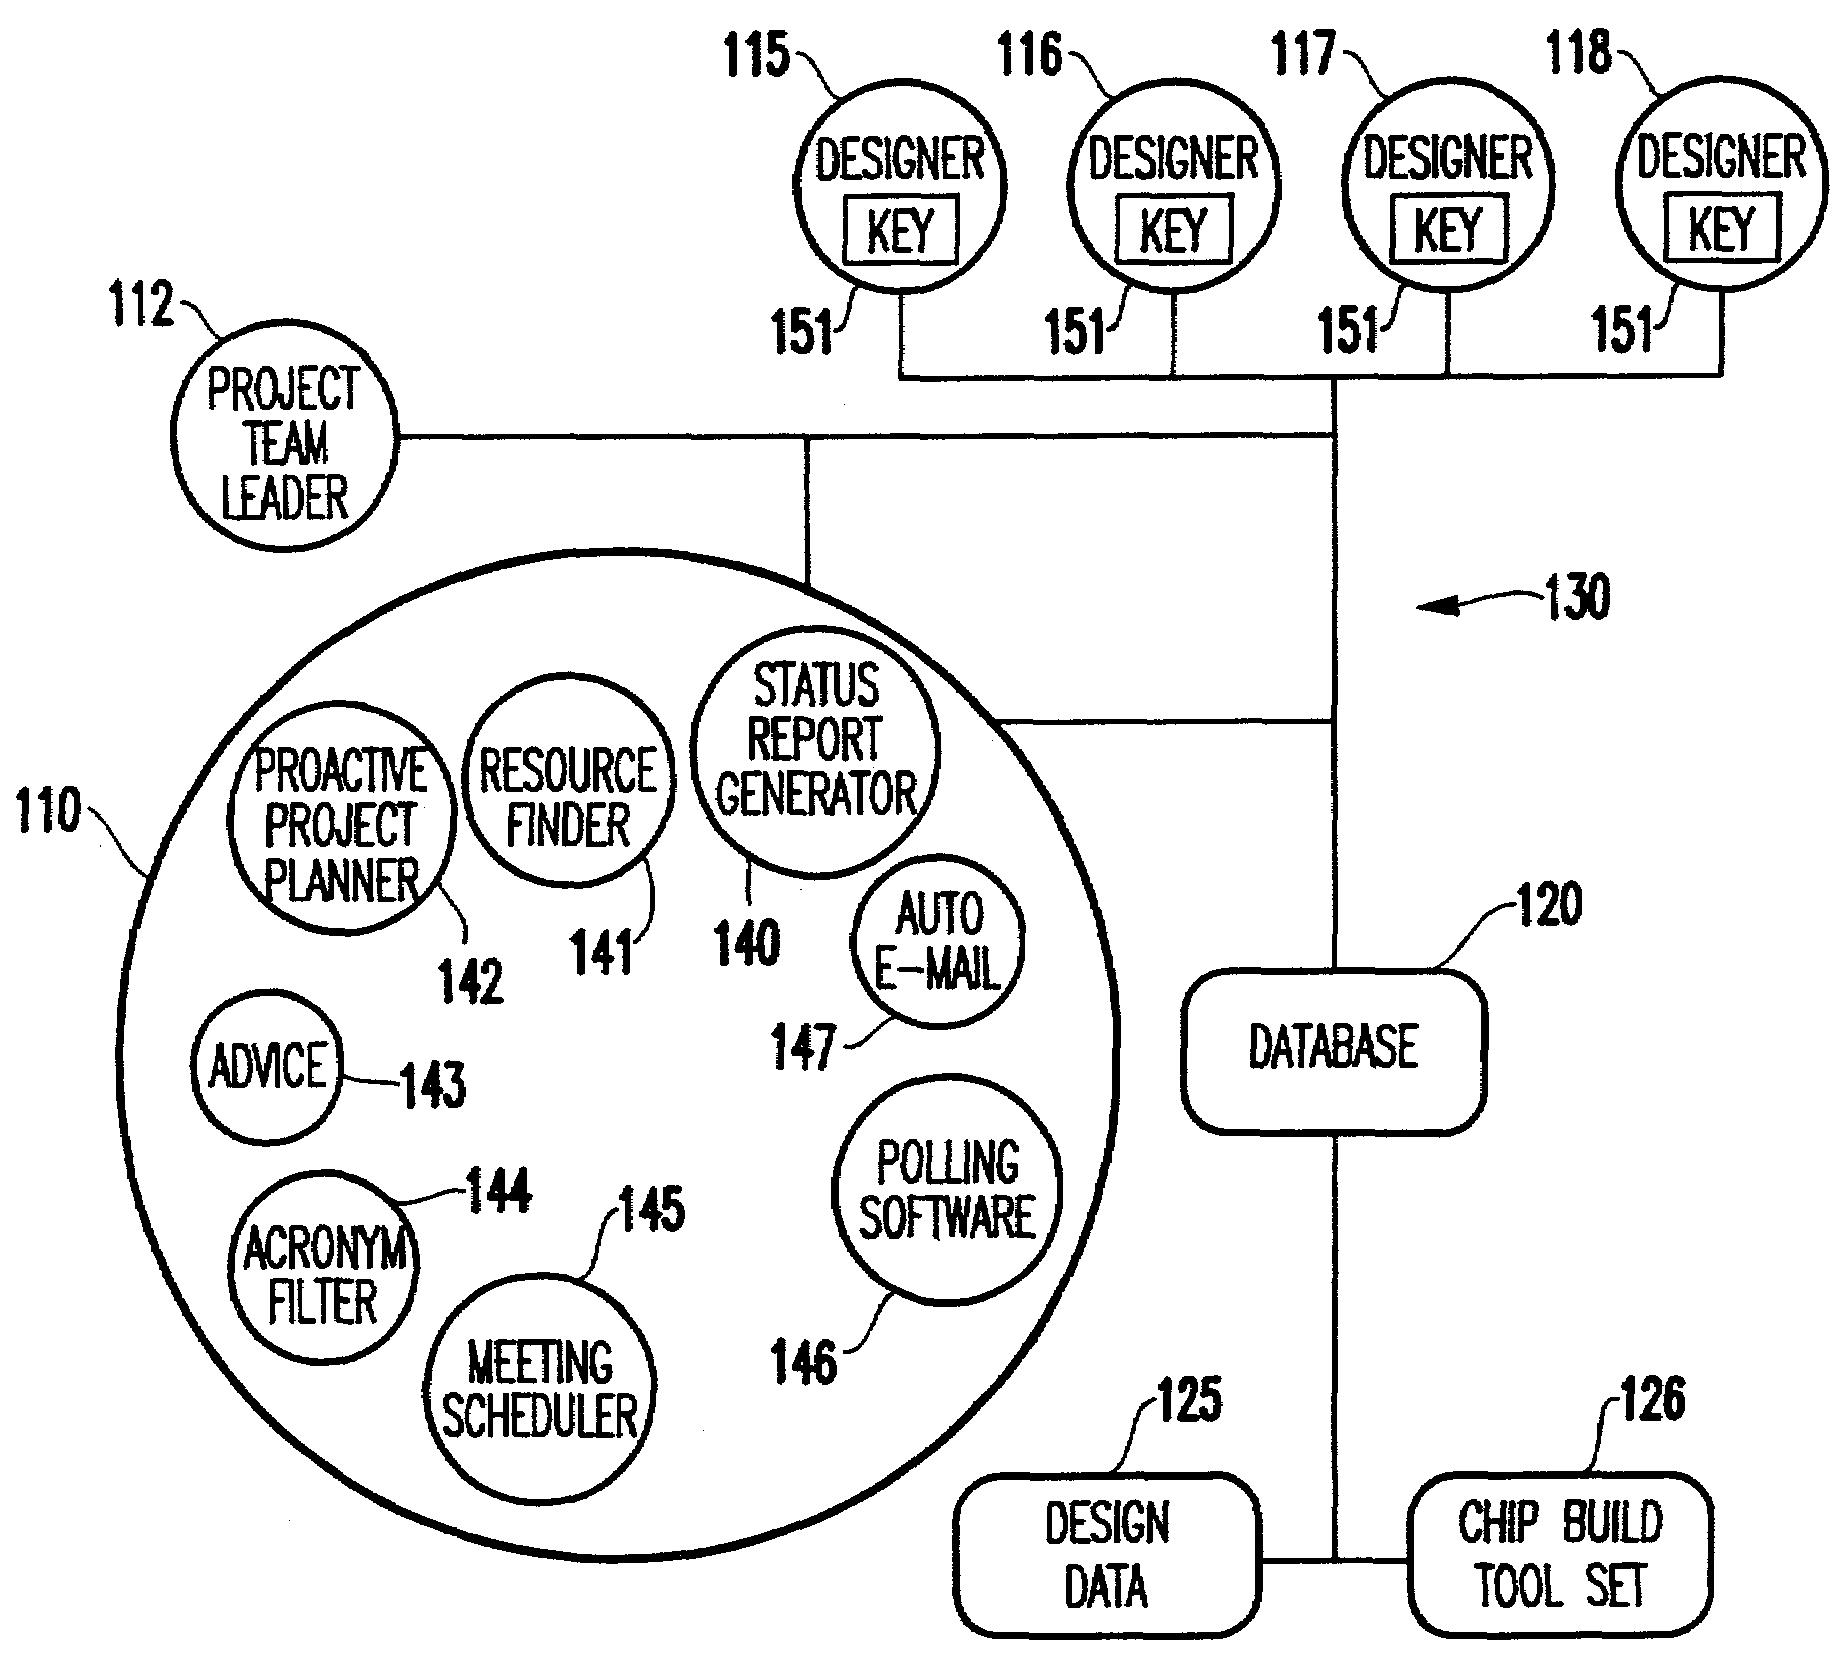 System and method for planning a design project, coordinating project resources and tools and monitoring project progress